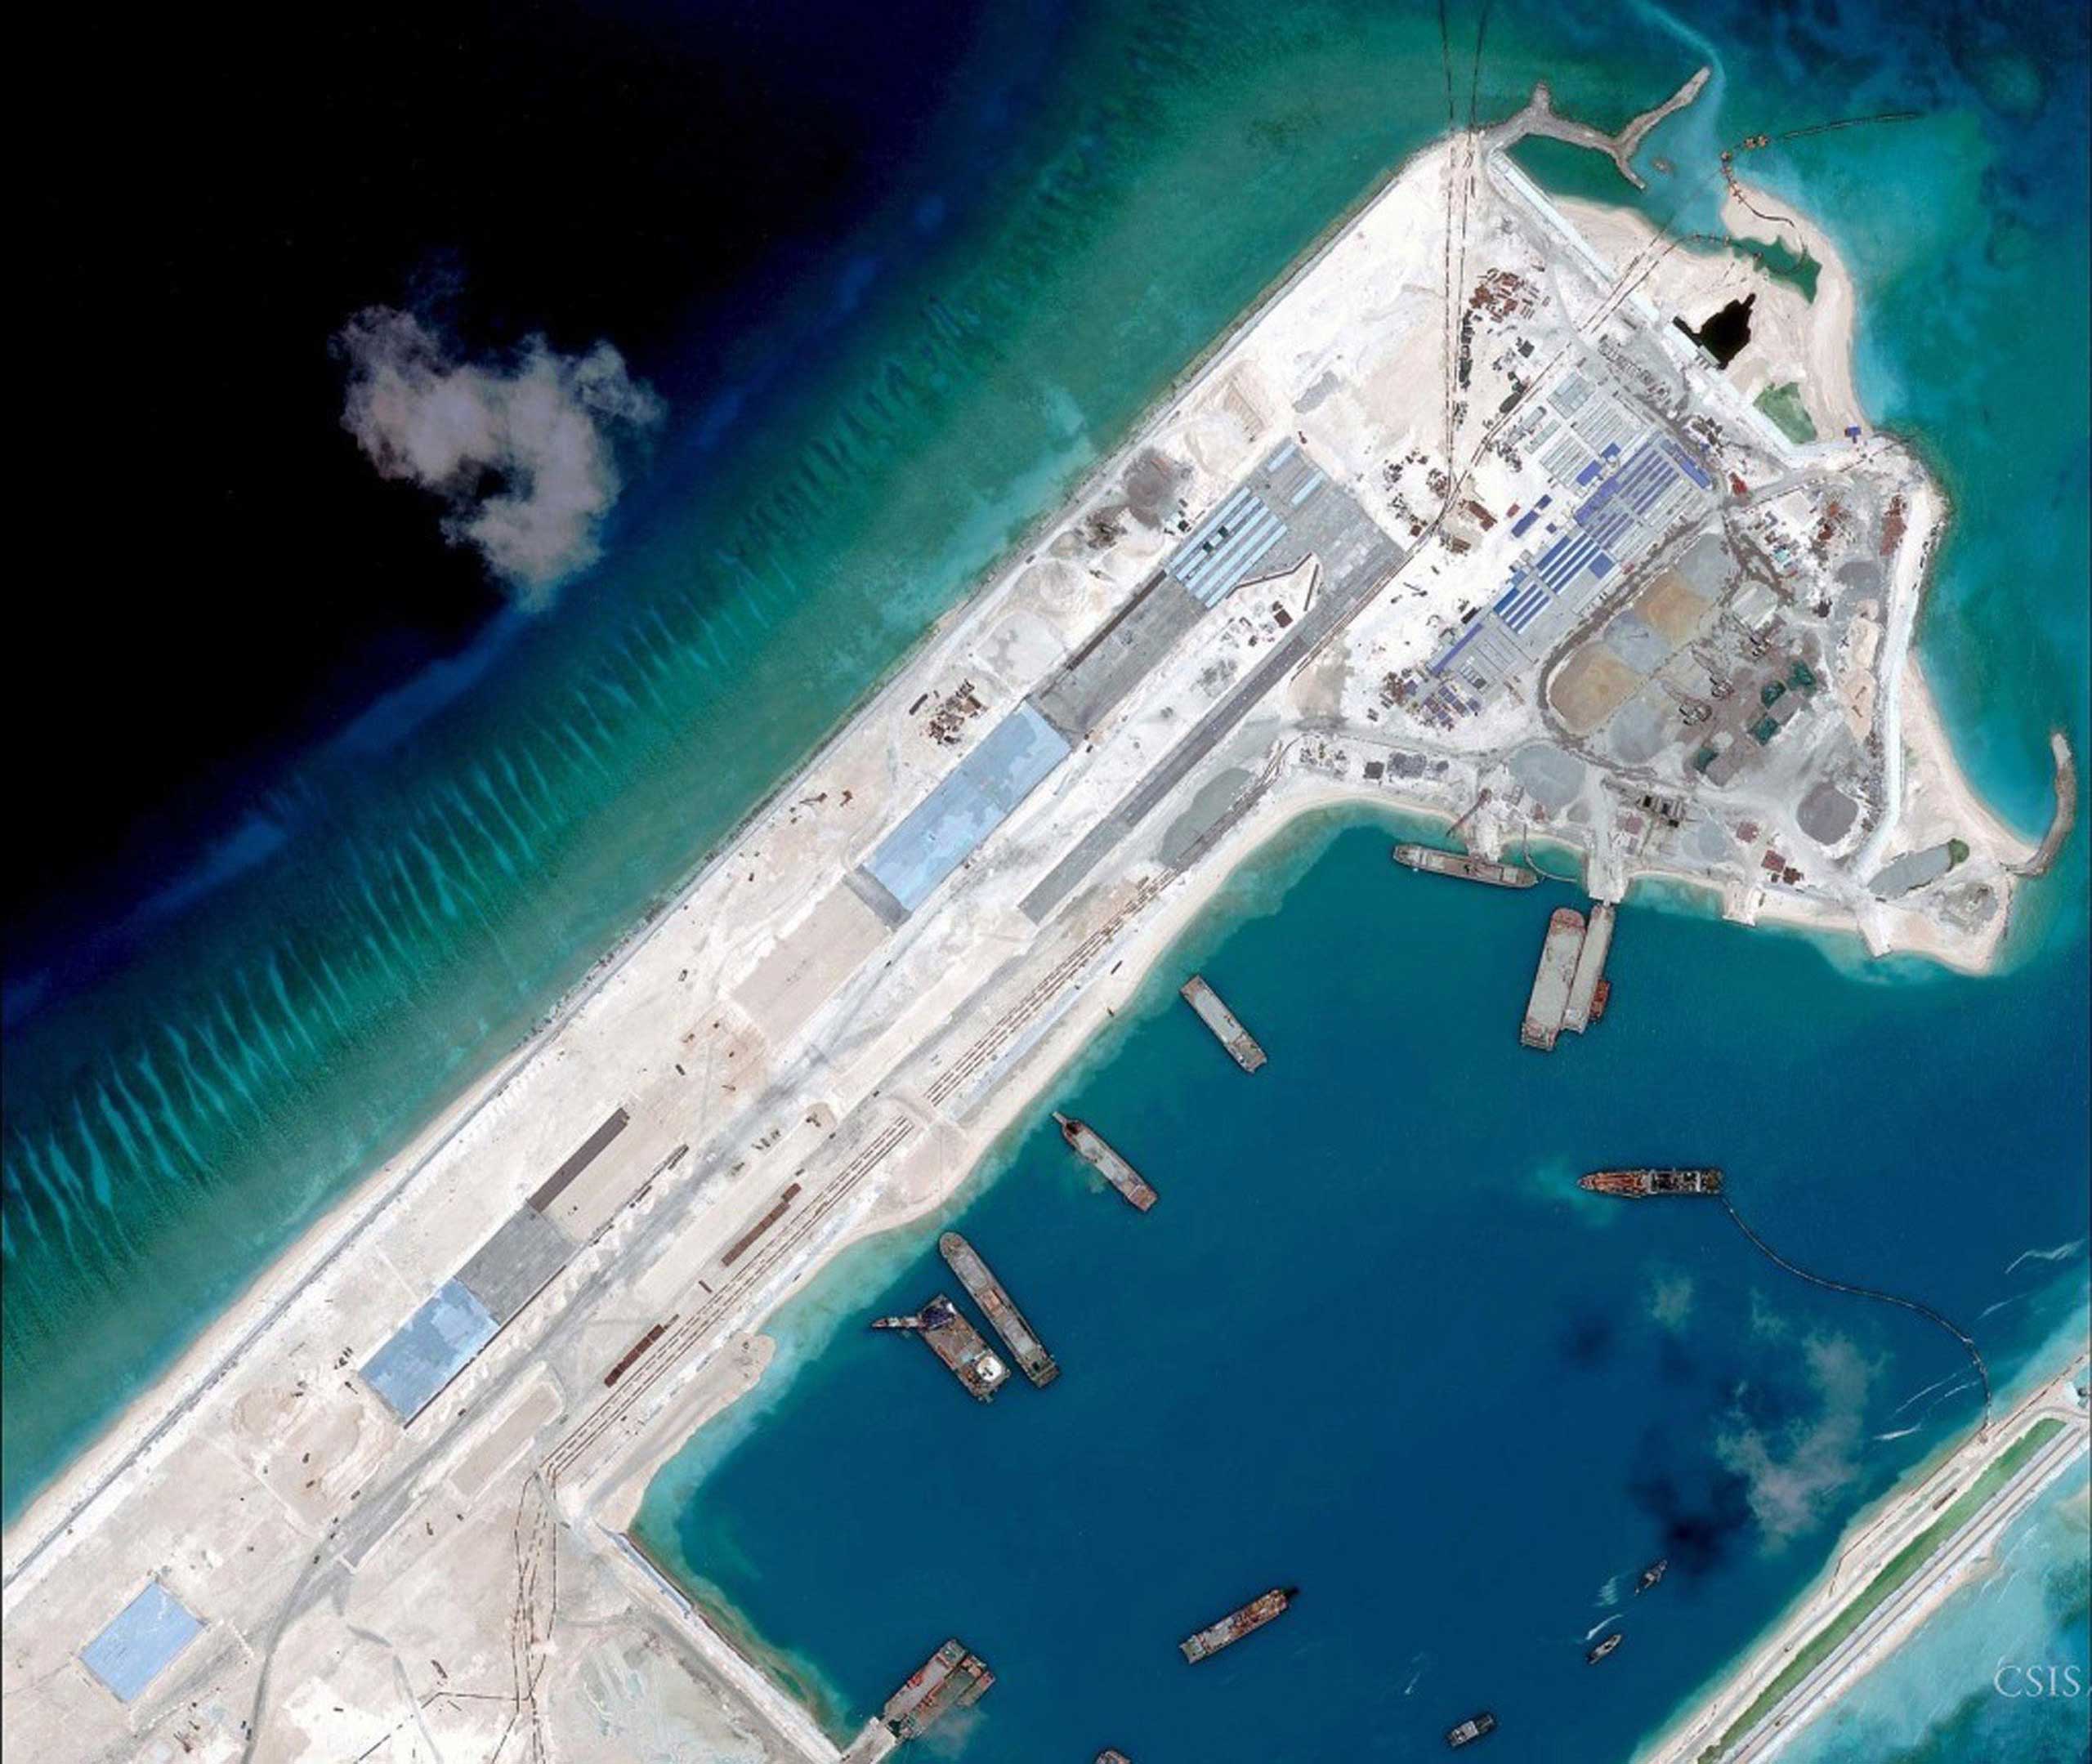 Airstrip construction on Fiery Cross Reef in the South China Sea, seen in a satellite image taken on  April 2, 2015. (Reuters)